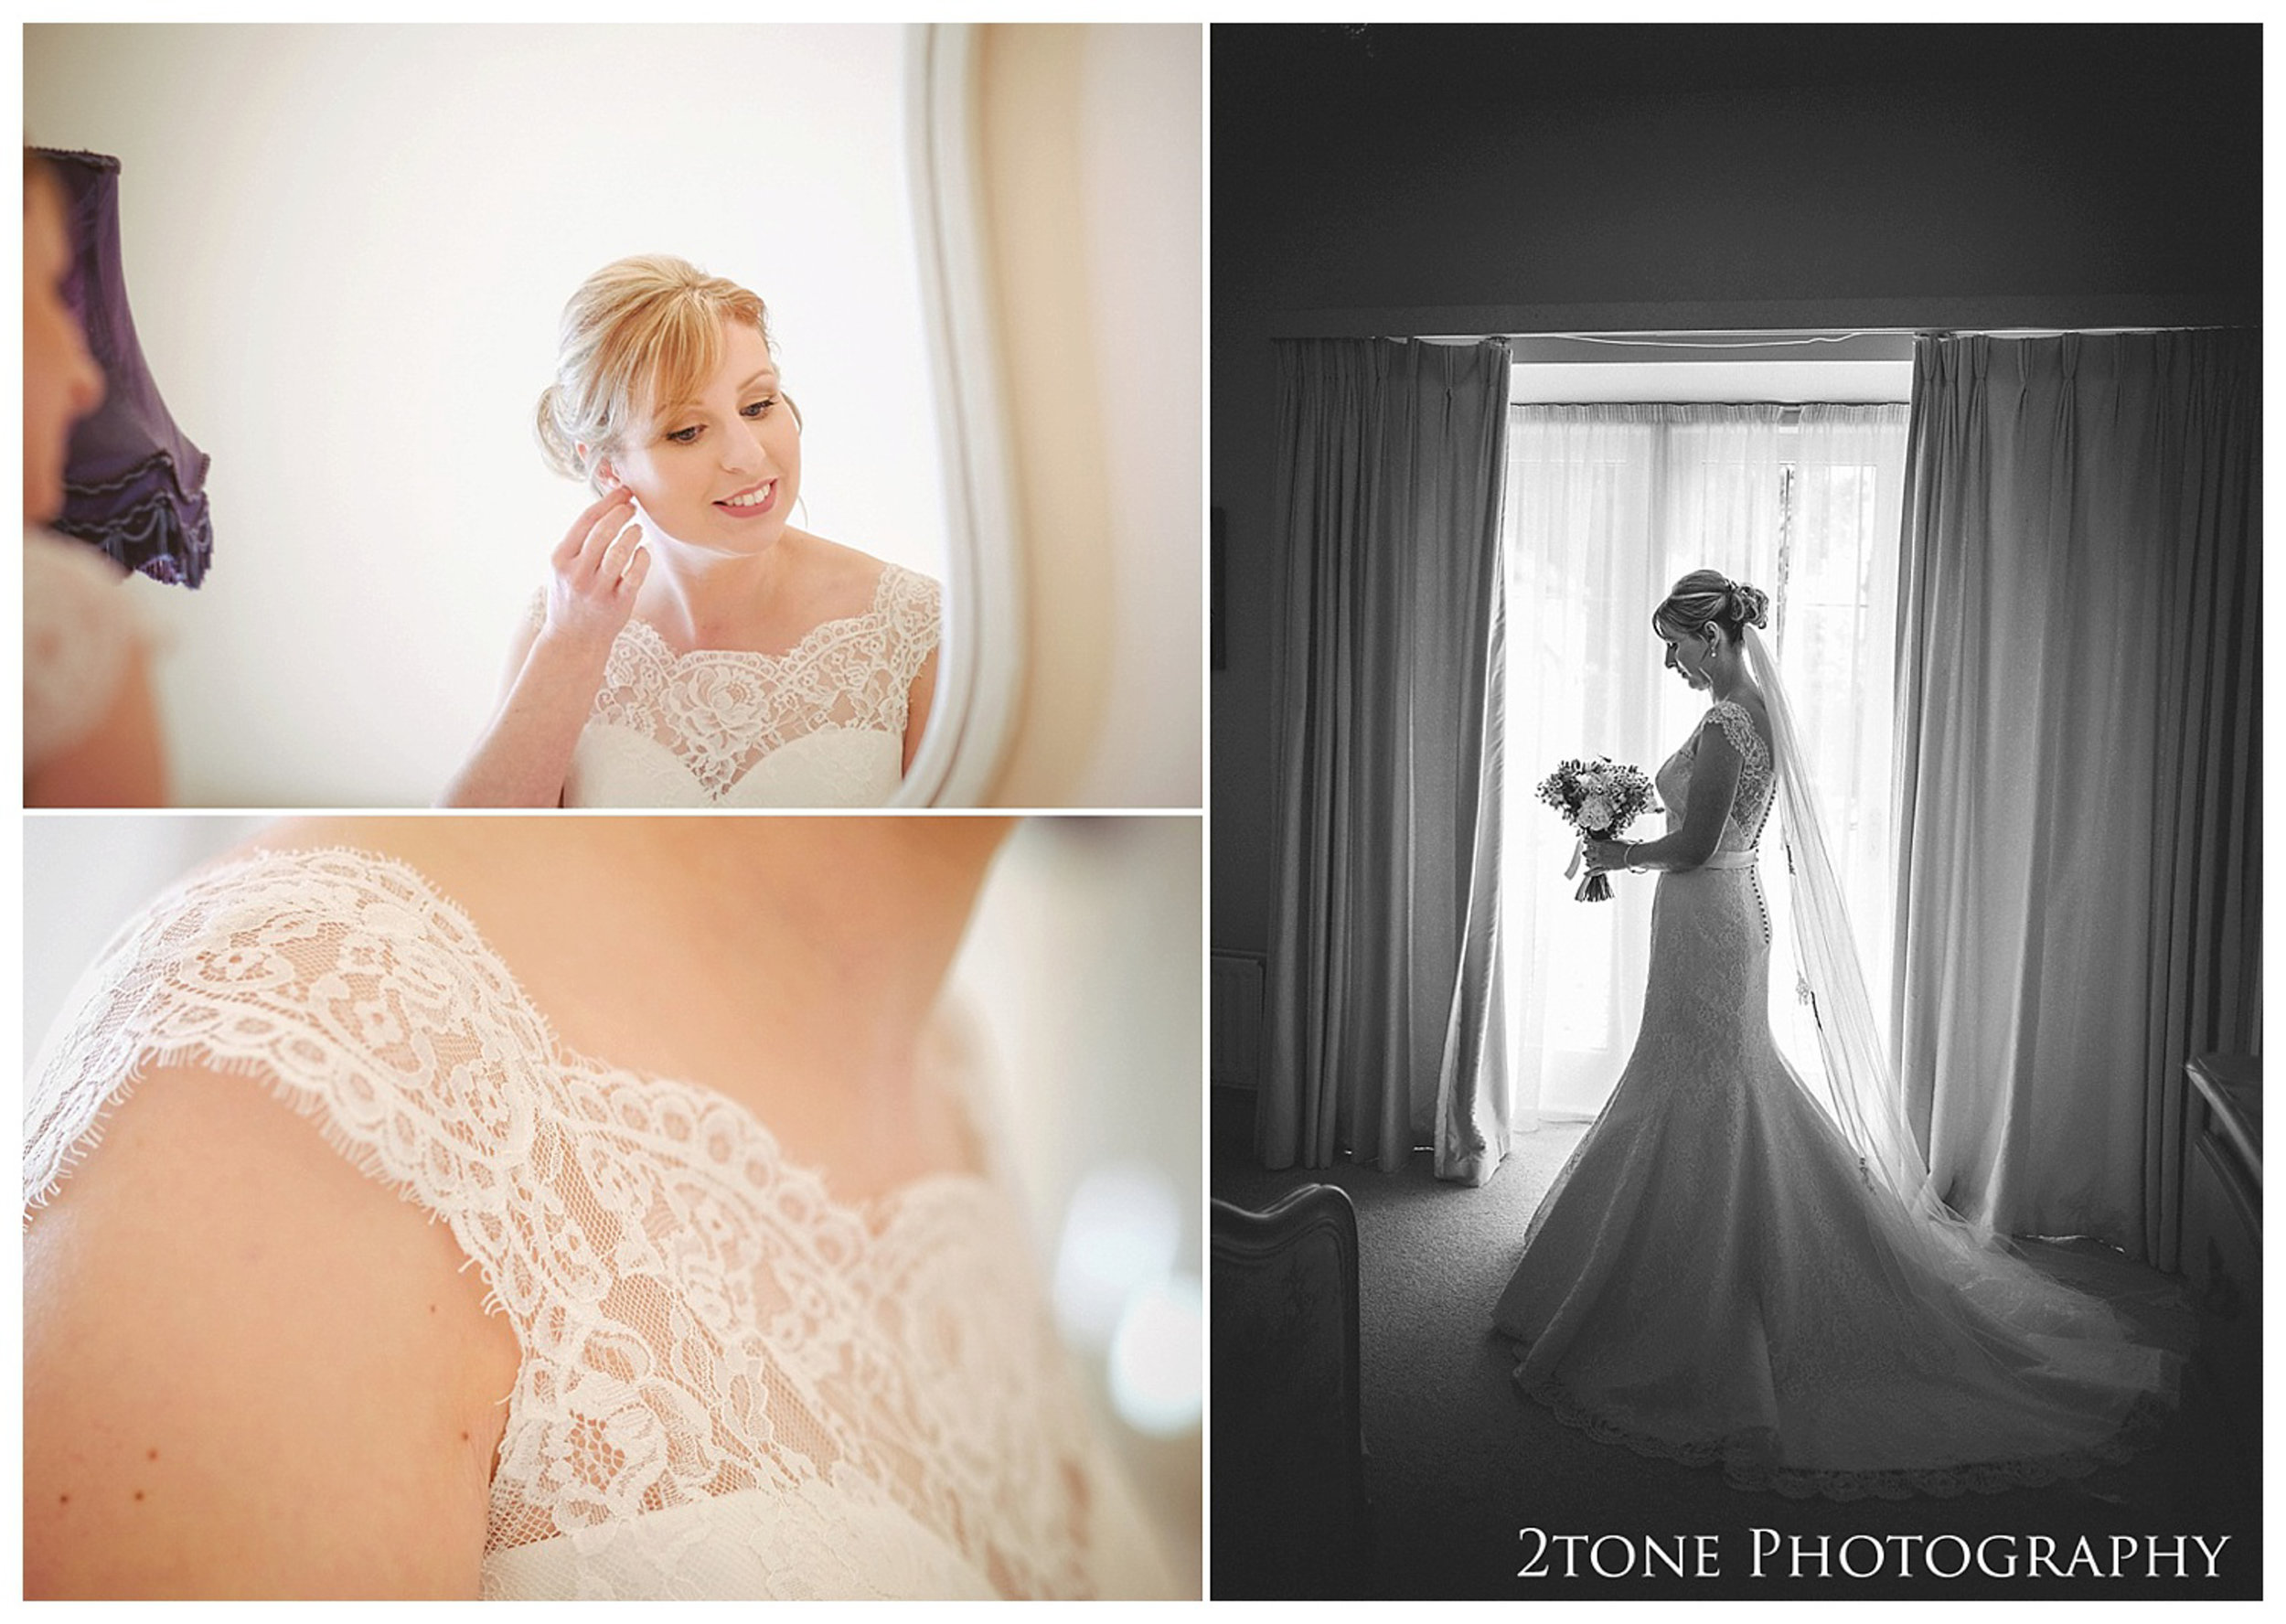  Bridal preparations.  Eshott Hall wedding photographs by wedding photographers based in Durham and the North East.  www.2tonephotography.co.uk. 